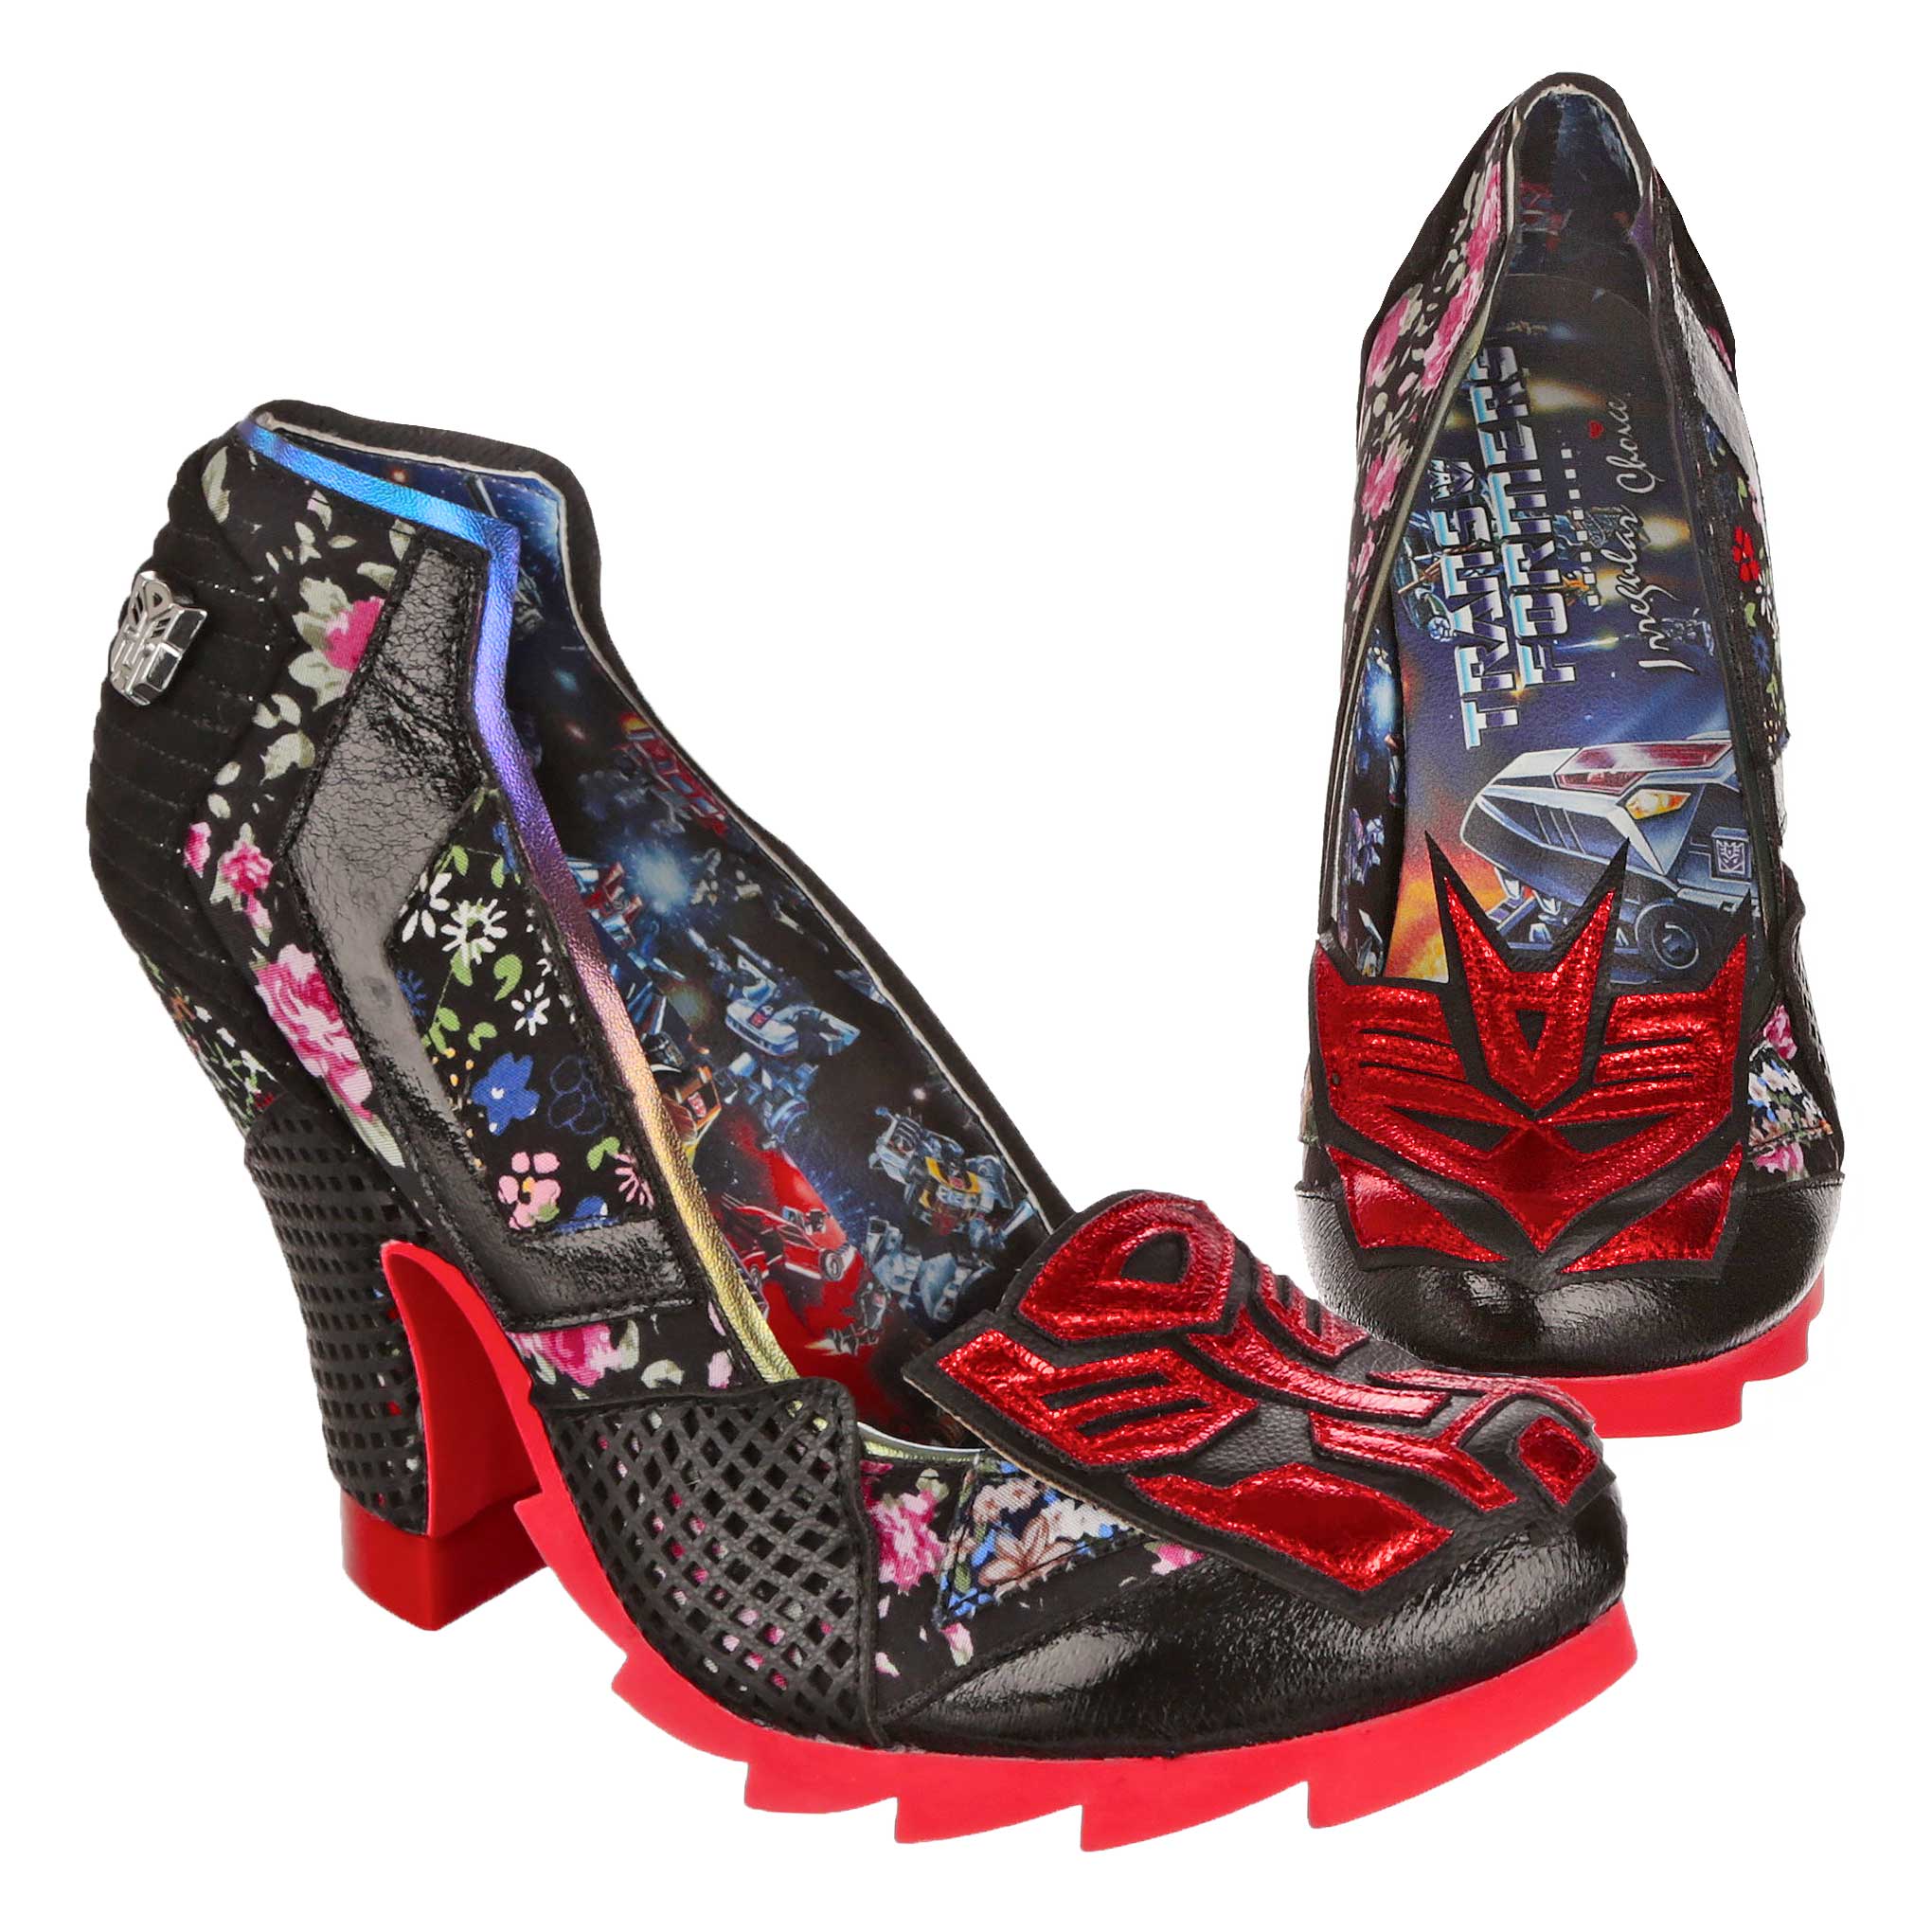 A pair of black Transformers themed chunky tread platform high heels with vintage floral fabric details and metallic red Autobot and Decepticon logos on the toe of the shoe. Red chunky soles contrast with the black shoe whilst a Transformers battle scene is shown in the shoe lining.